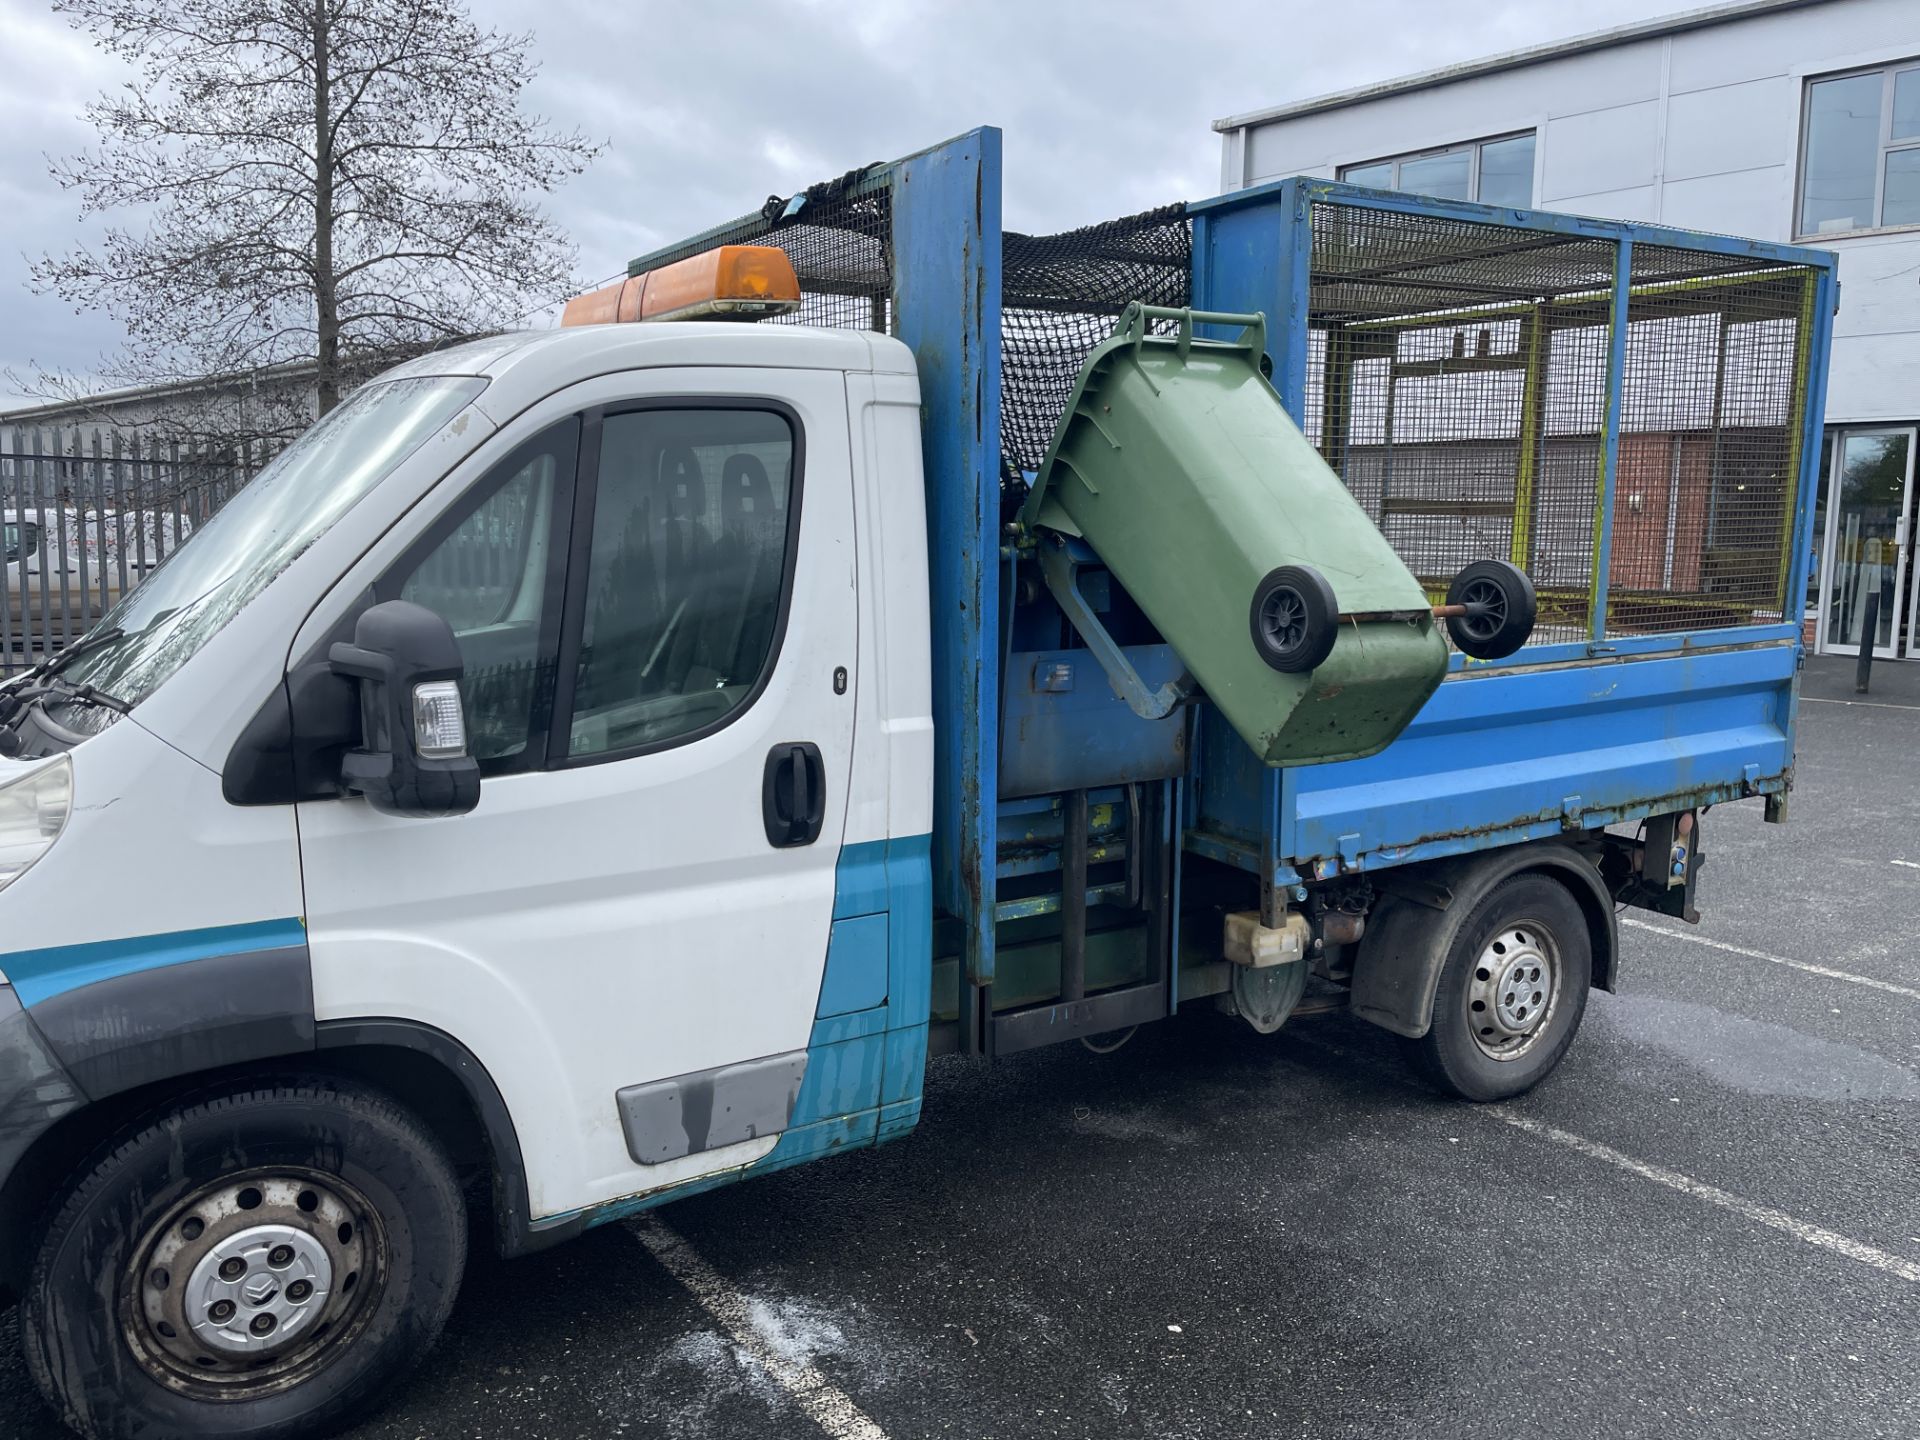 Citroen Relay Caged Tipper with rare Wheelie Bin Lift (39568) - Image 16 of 19